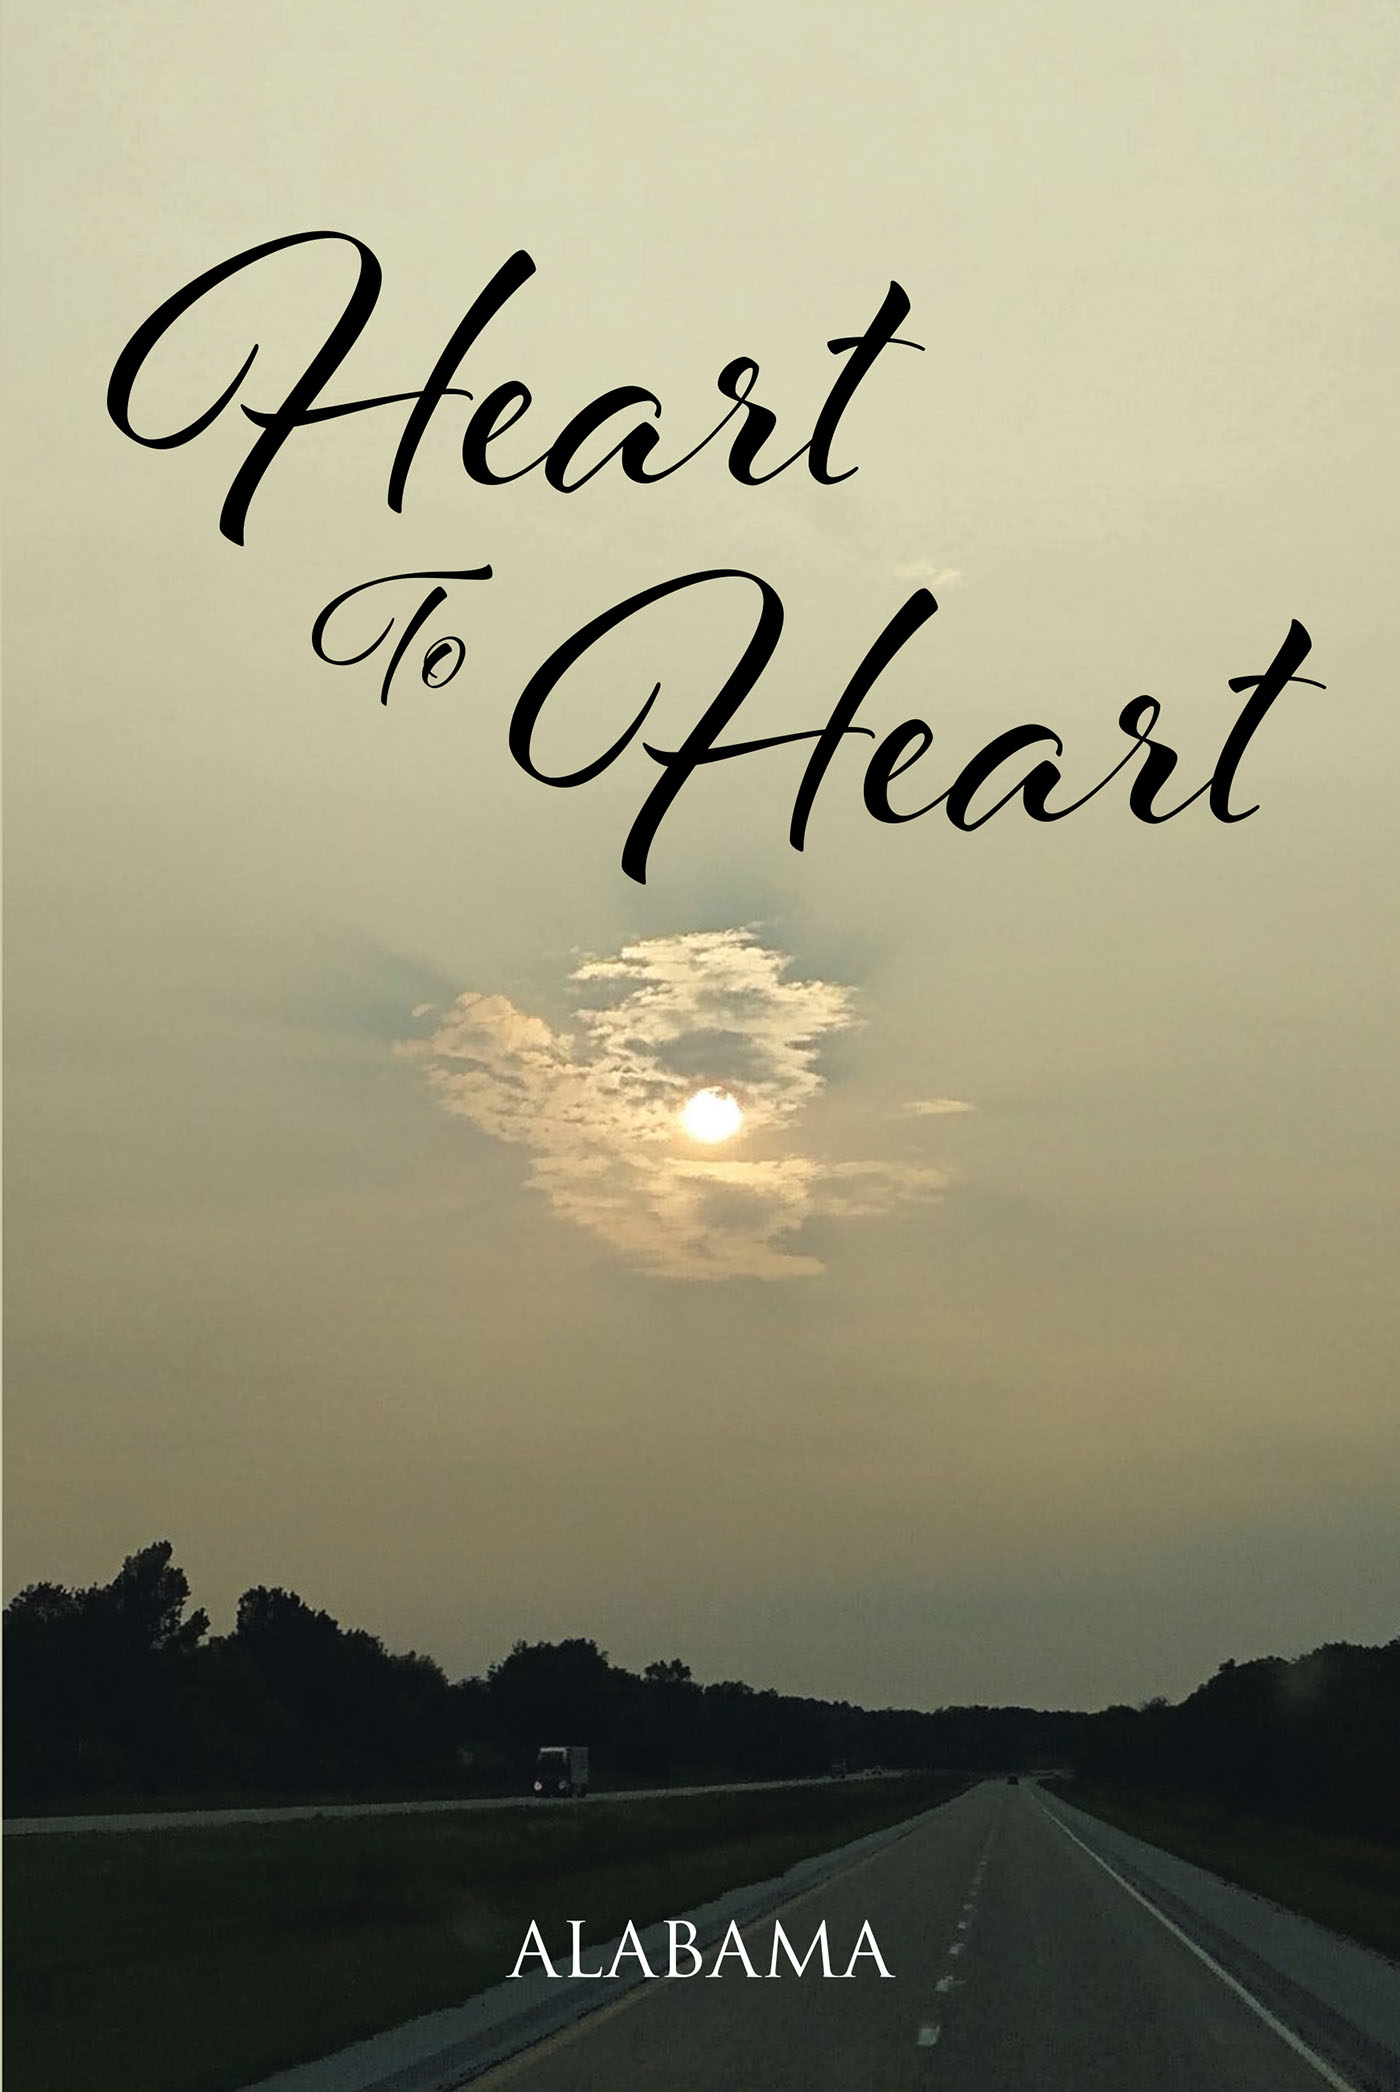 Alabama’s Newly Released "Heart To Heart" is an Emotionally Charged Collection of Poetry That Draws from Deeply Personal Experiences